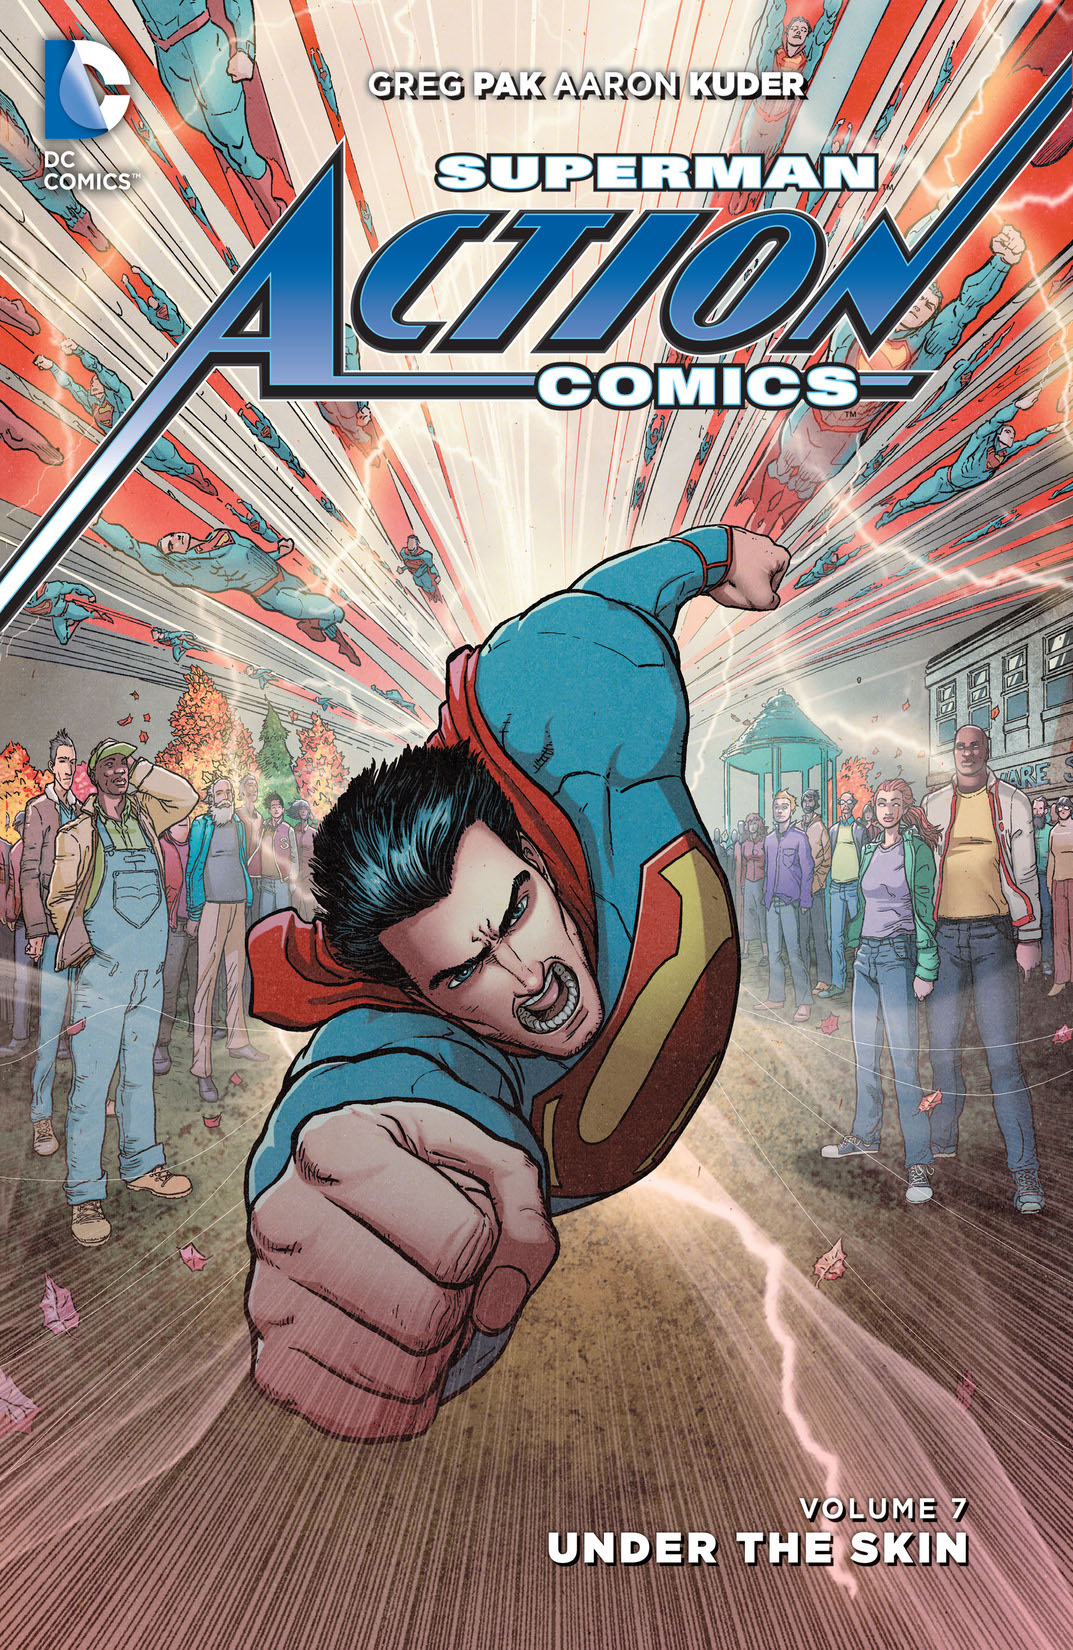 Superman - Action Comics Vol. 7: Under the Skin preview images